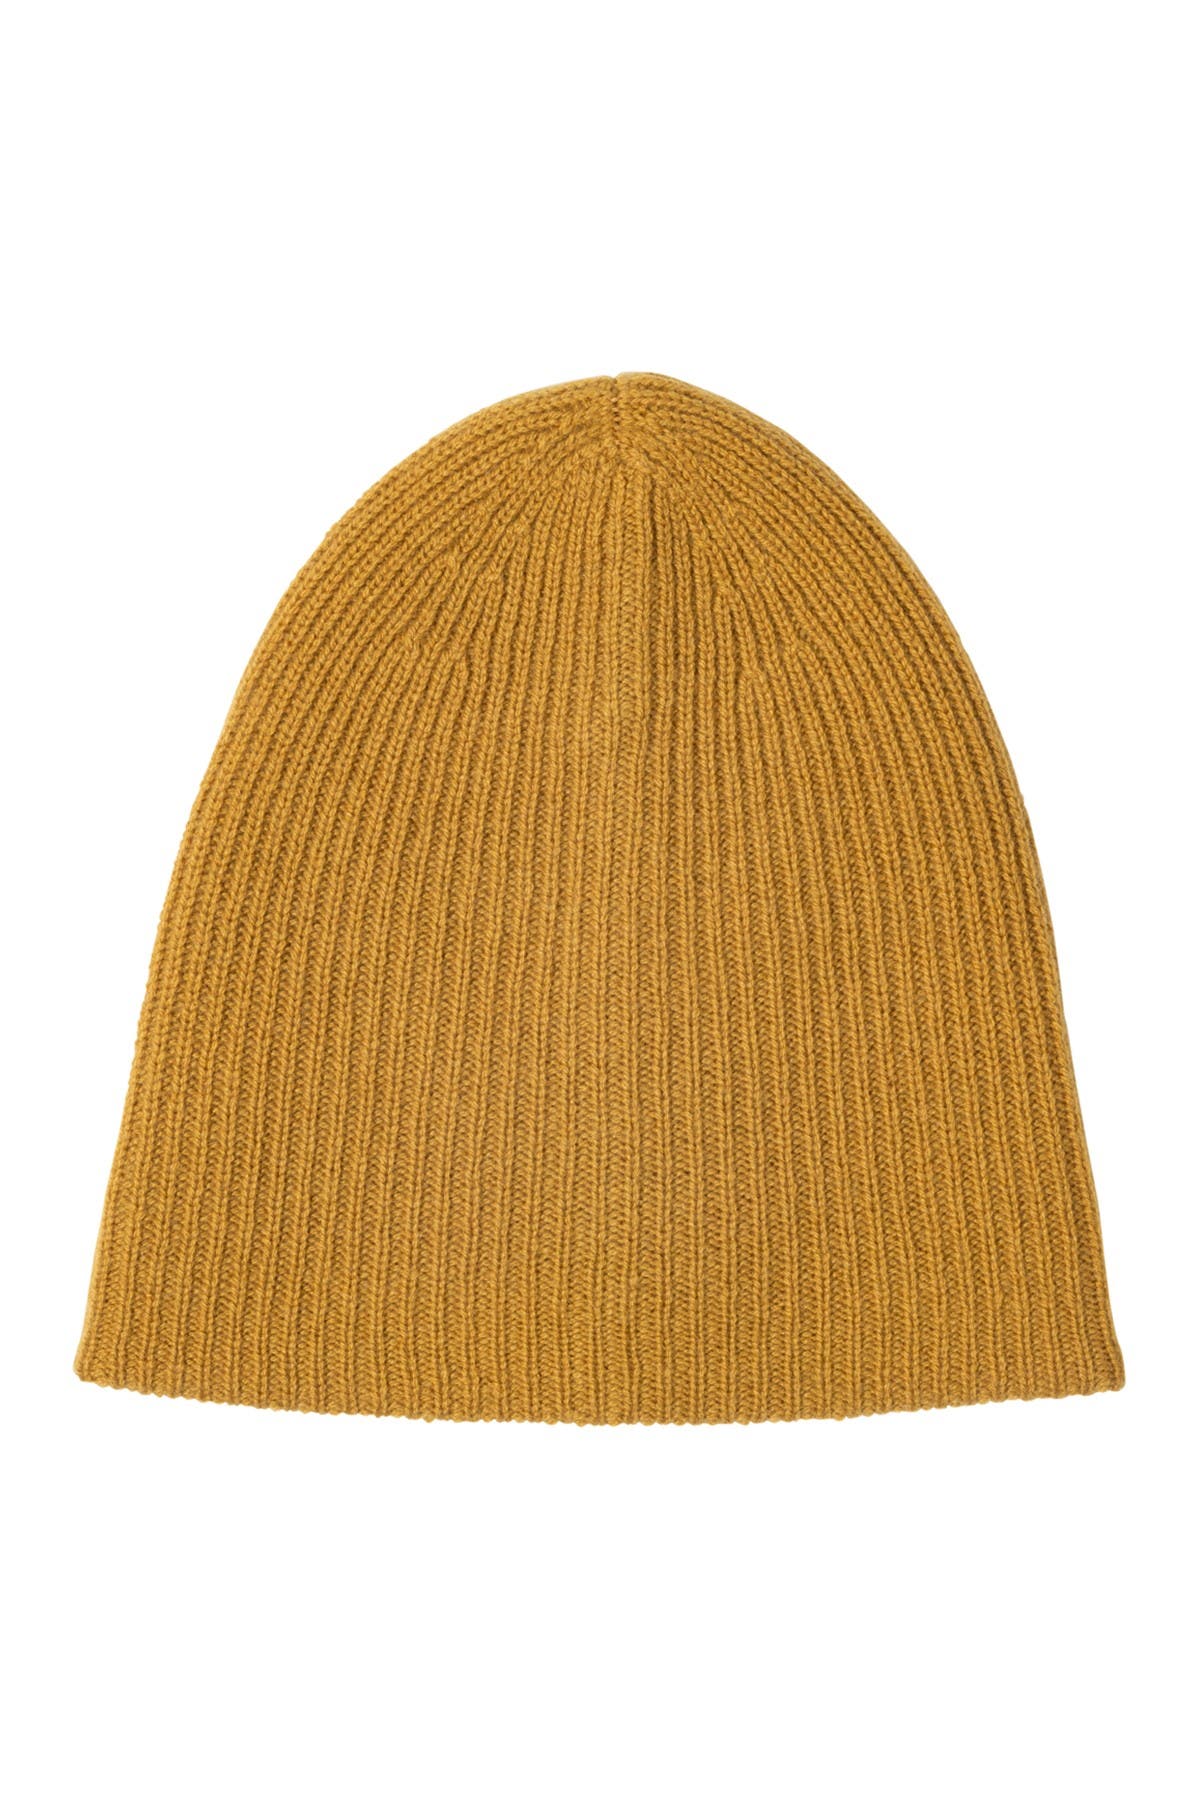 Amicale Cashmere Double Layer Rib Knit Hat In 710gld